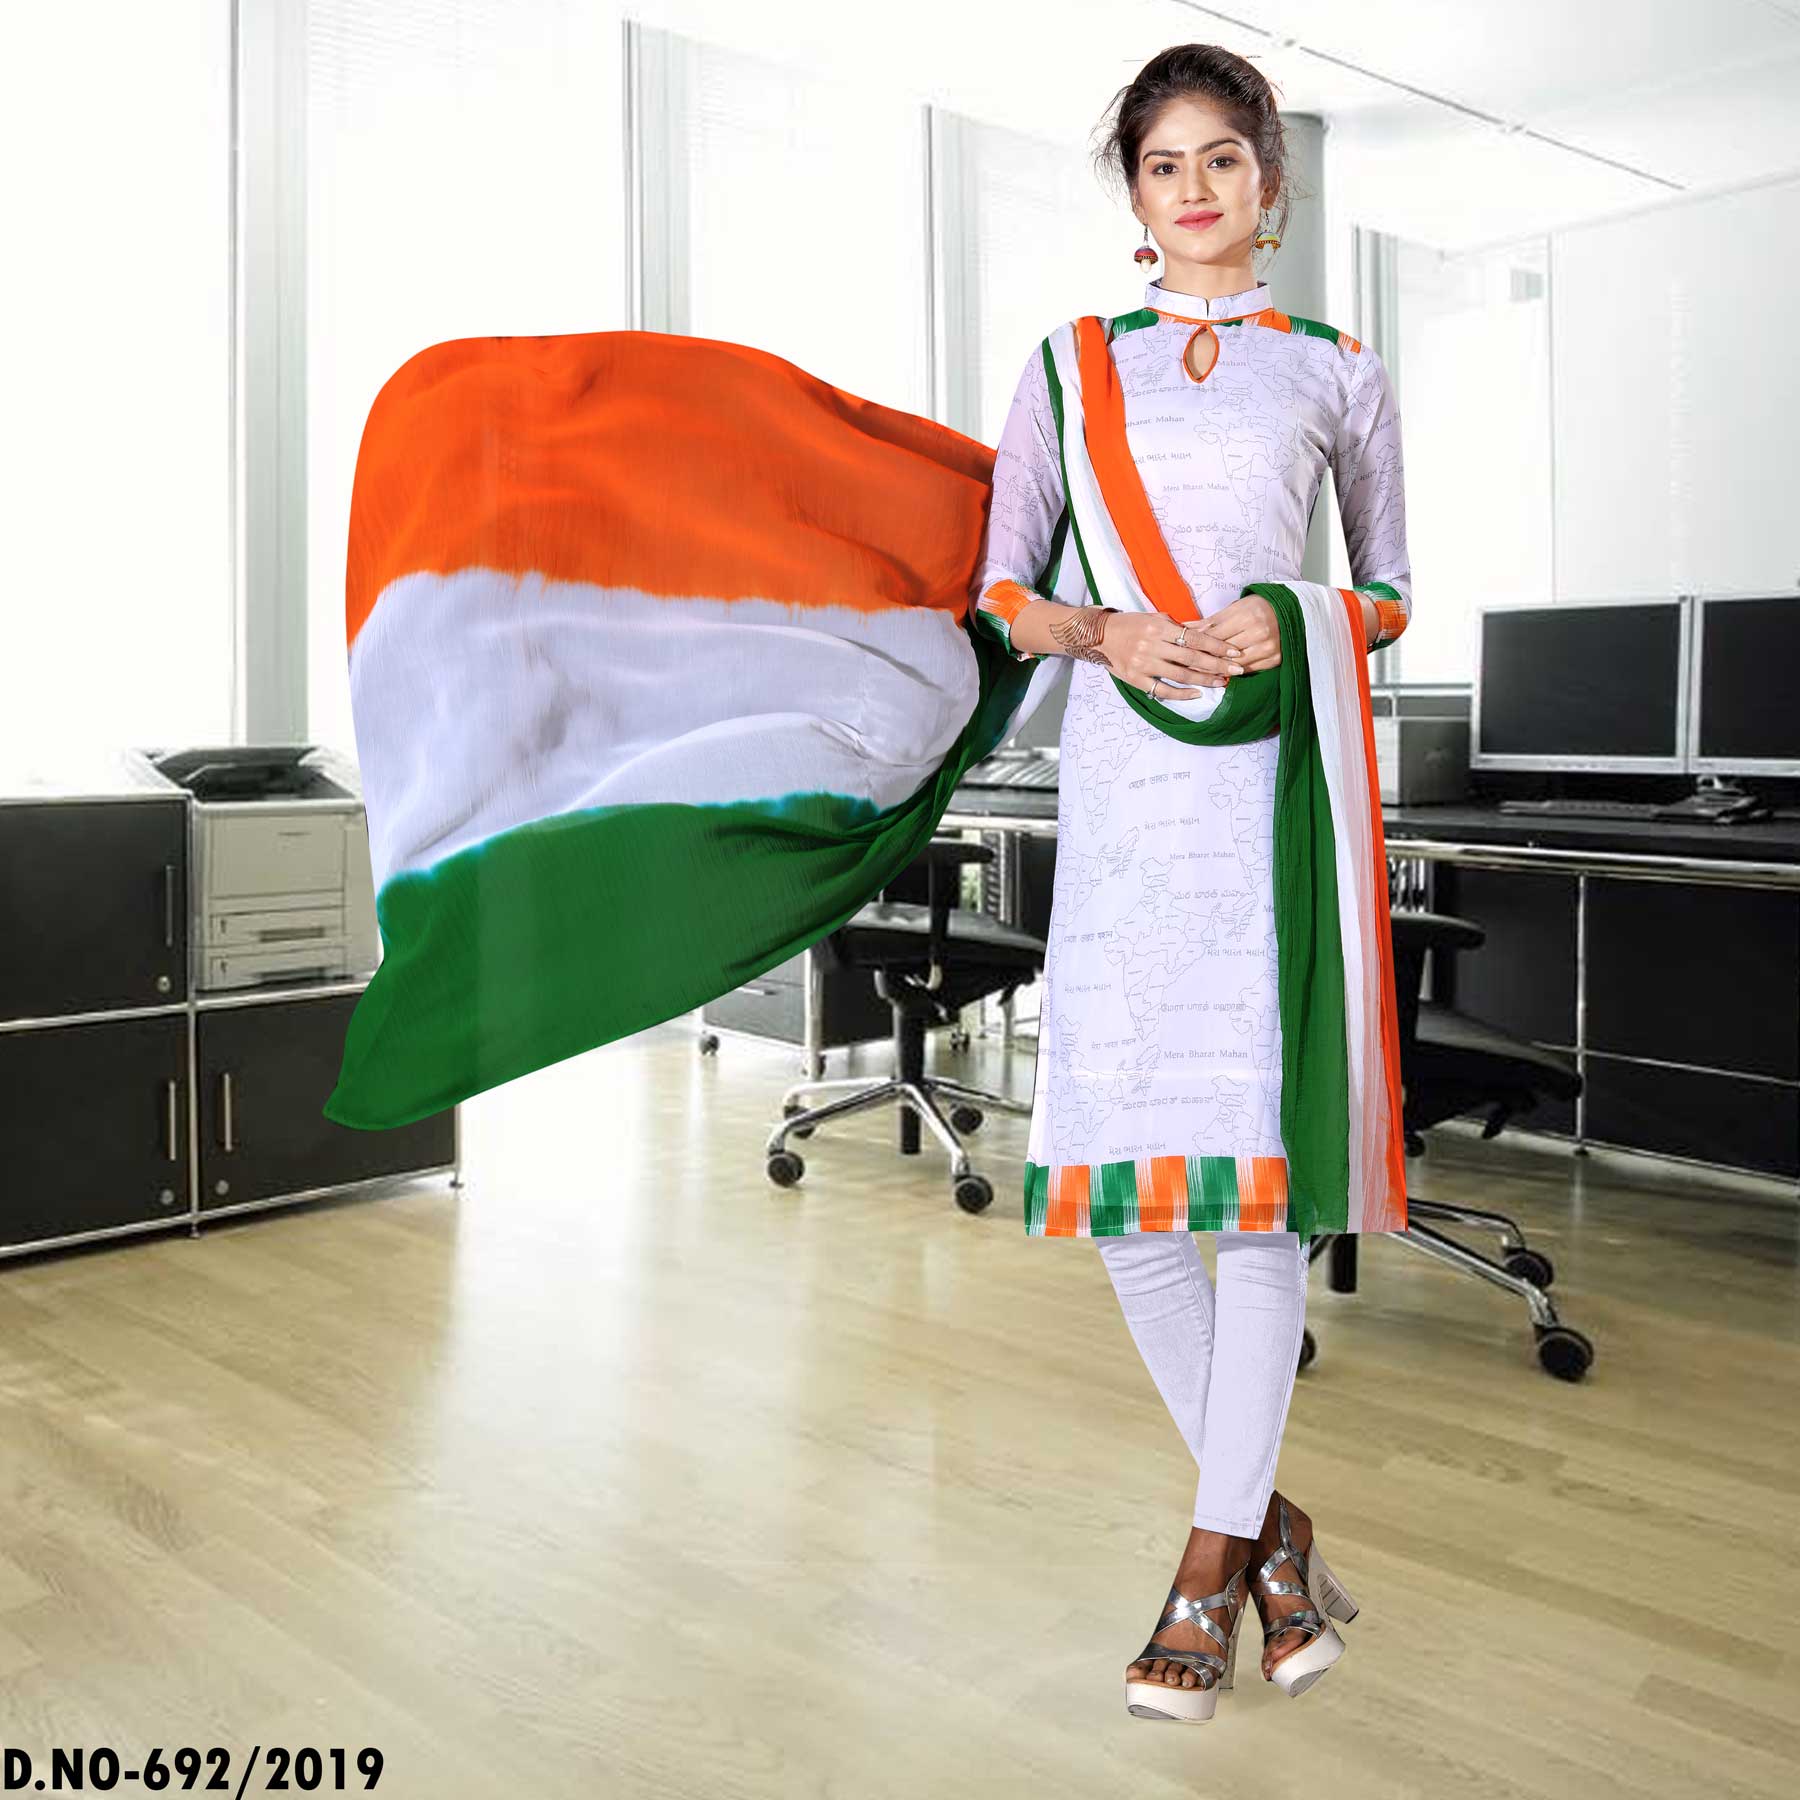 Ethnic Outfits For Men & Women To Get Into The Spirit Of Independence -  KALKI Fashion Blog